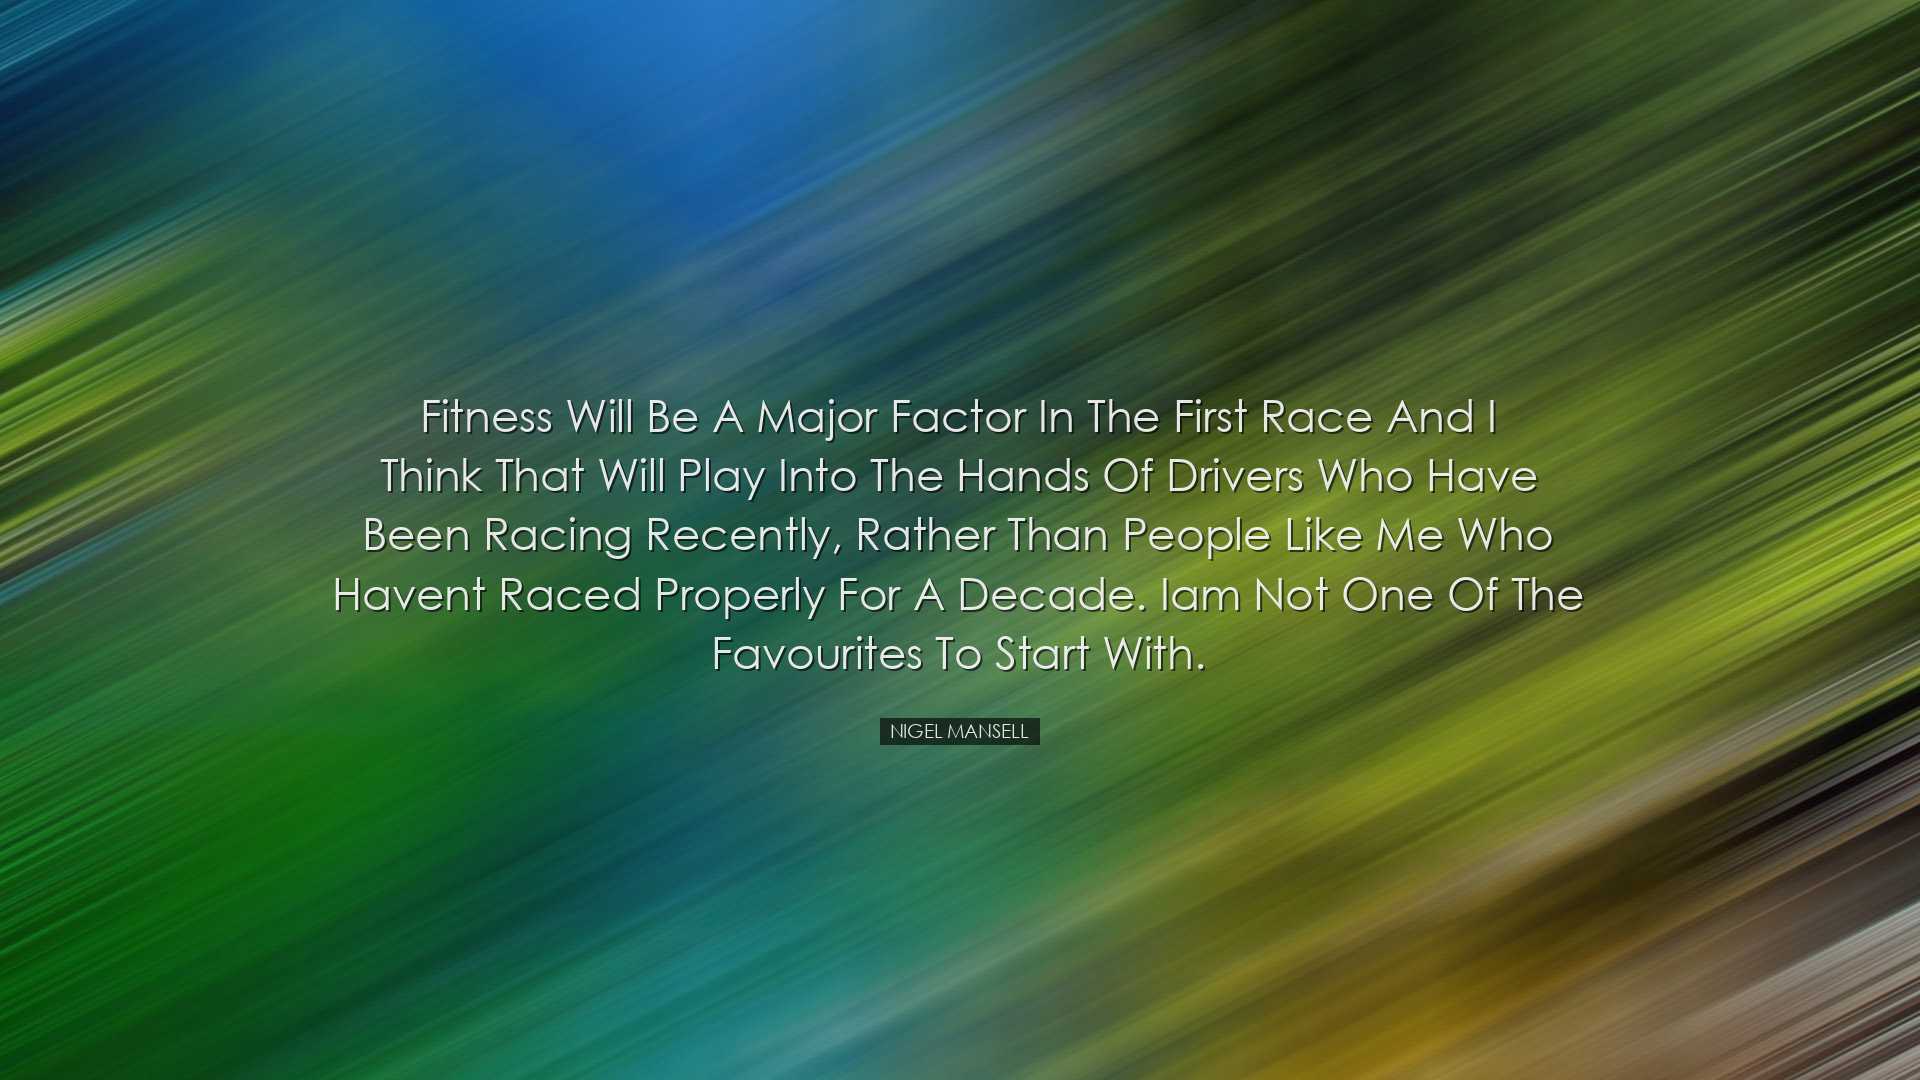 Fitness will be a major factor in the first race and I think that